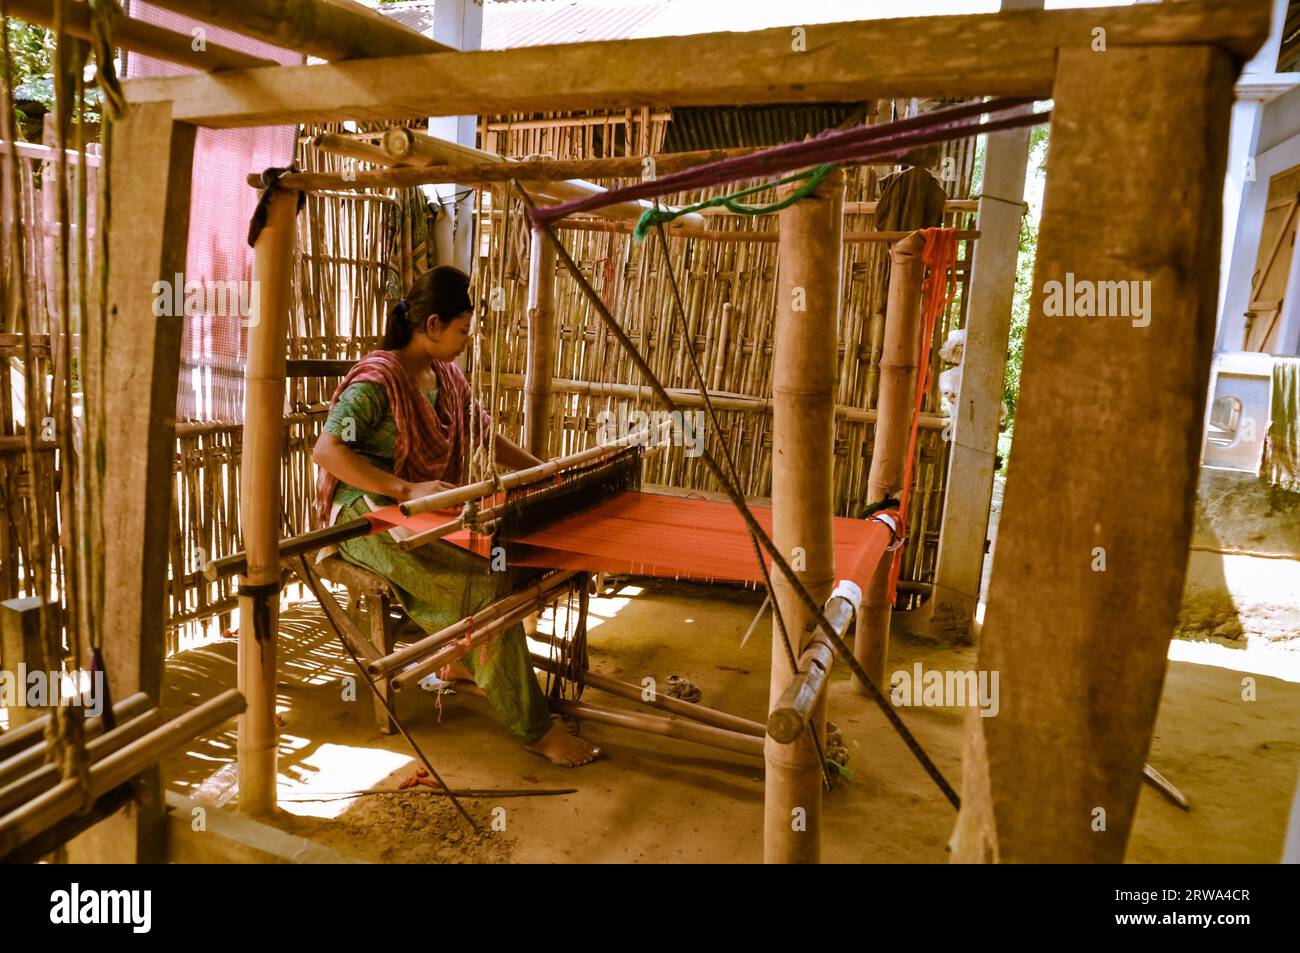 Srimongal, Bangladesh, circa July 2012: Young black-haired woman sits and weaves on simple wooden loom in Srimongal, Bangladesh. Documentary editorial Stock Photo